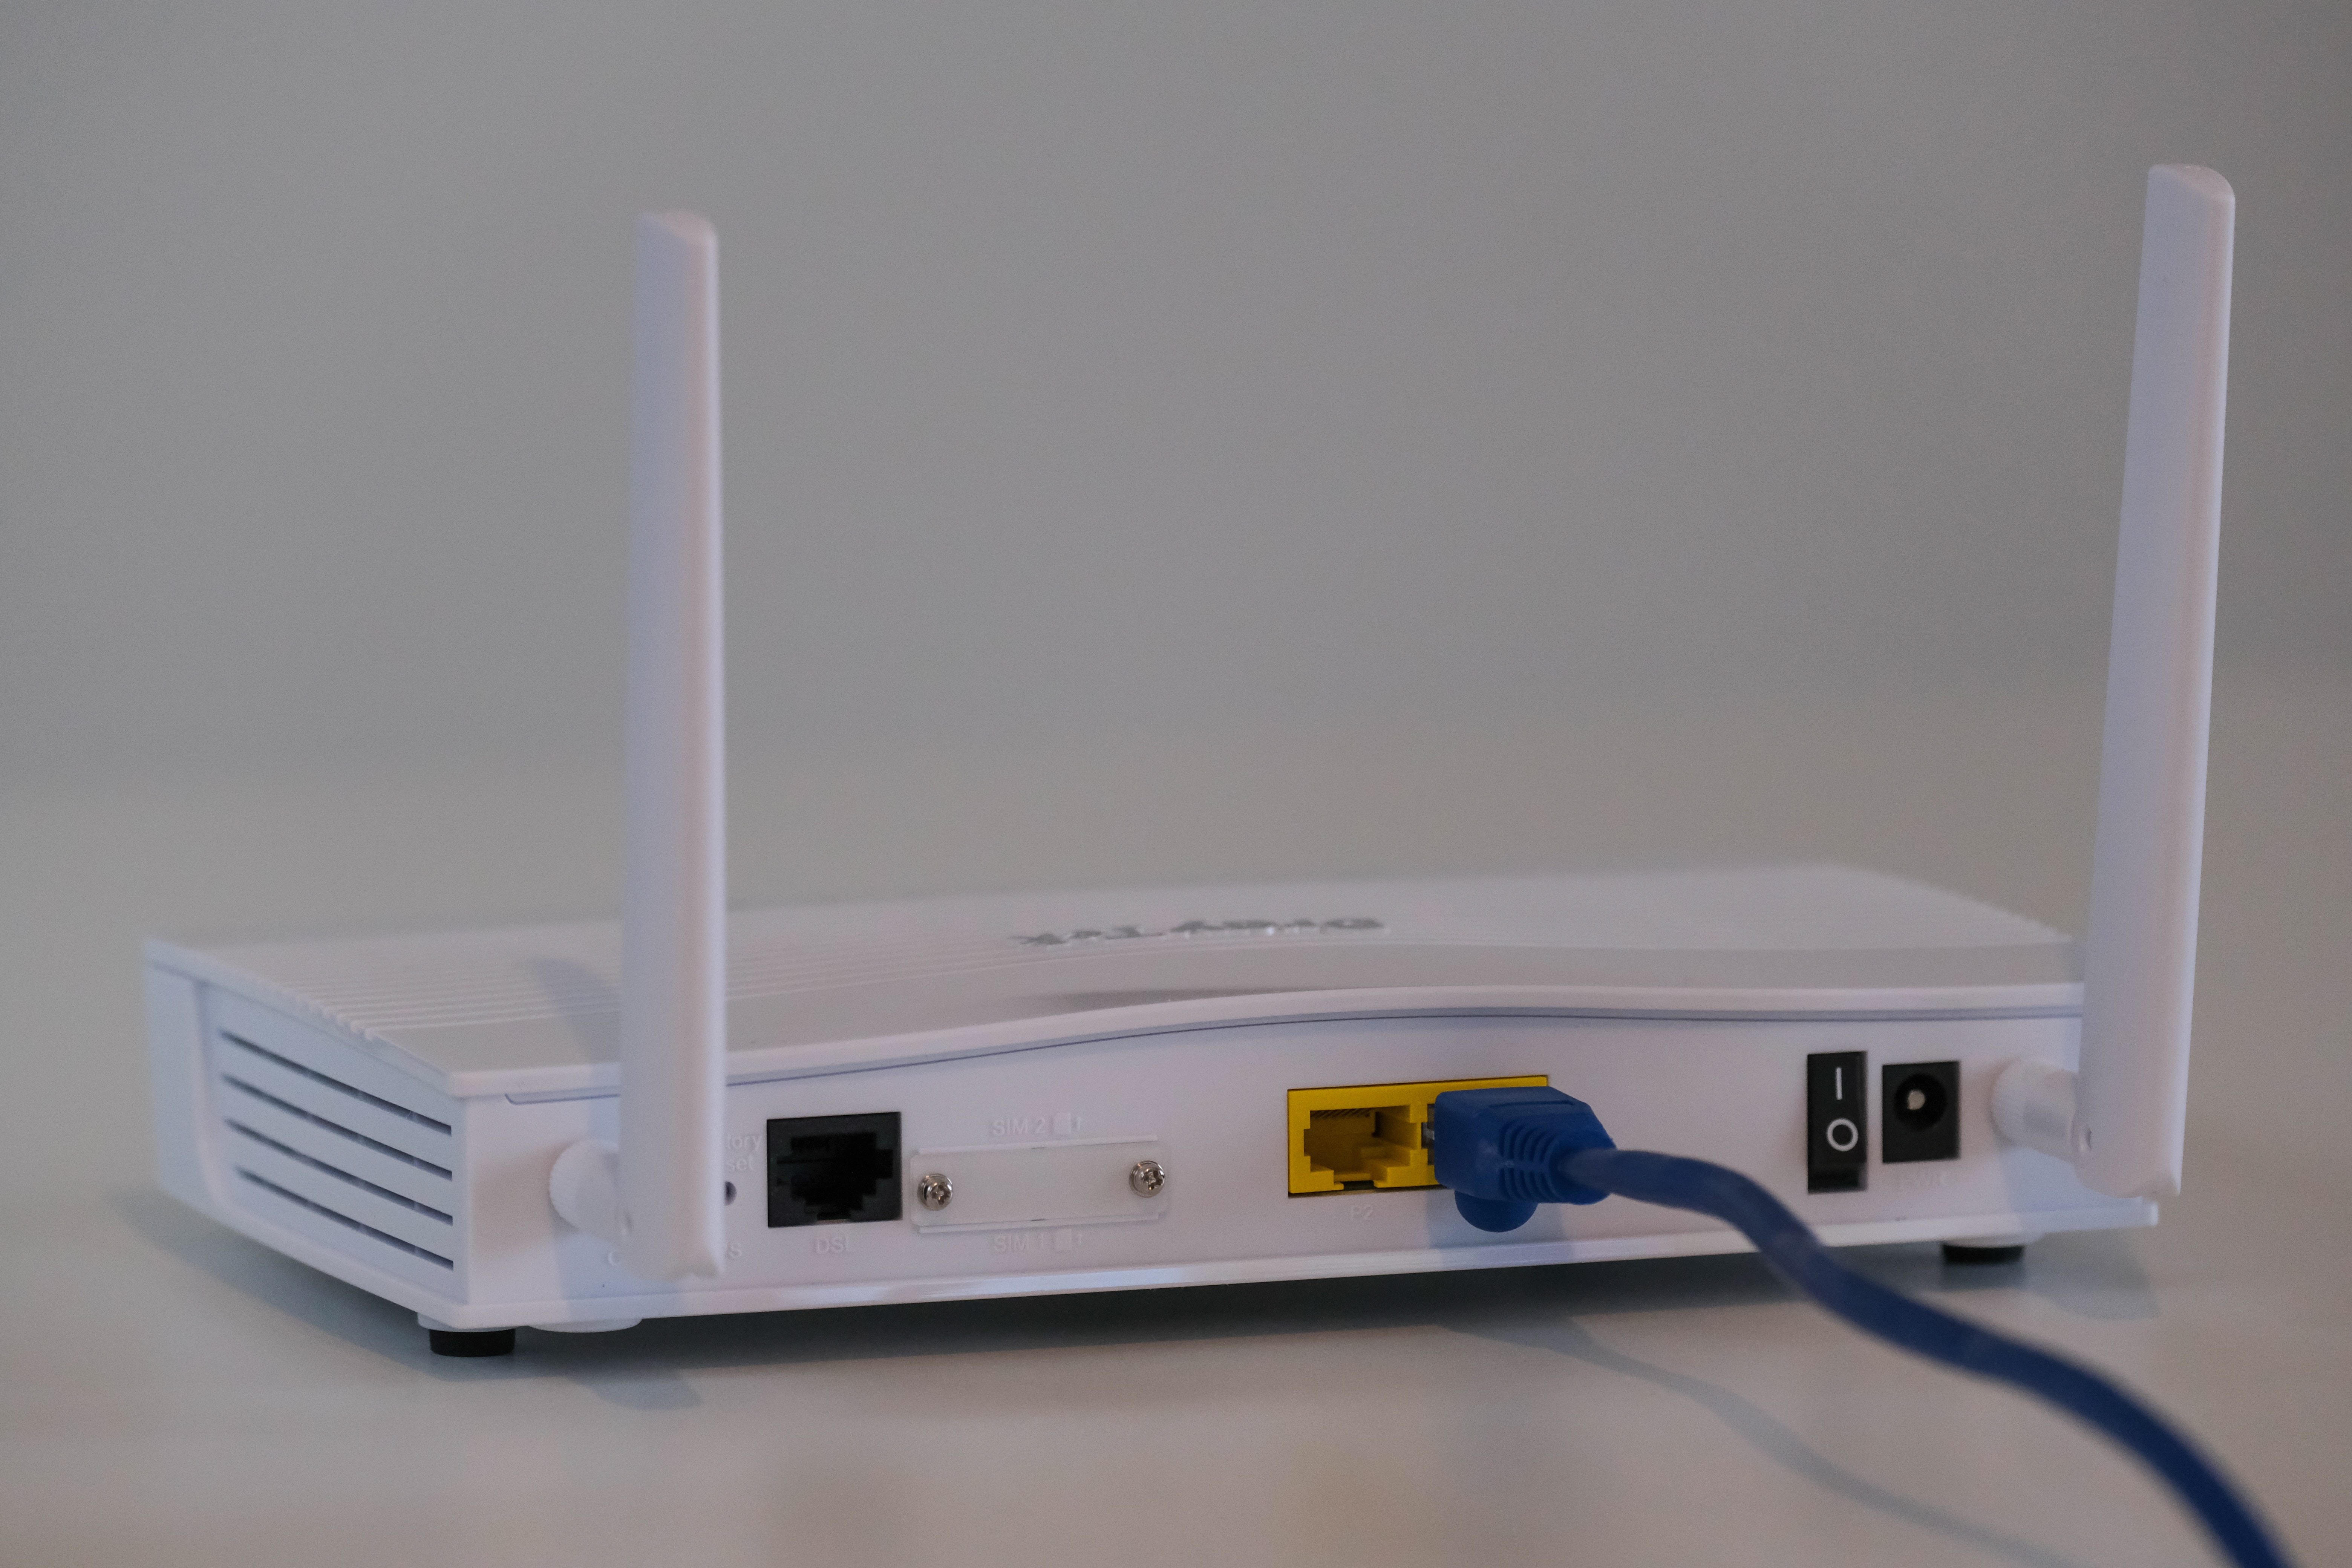 What Is An Internet Or Network Dongle?